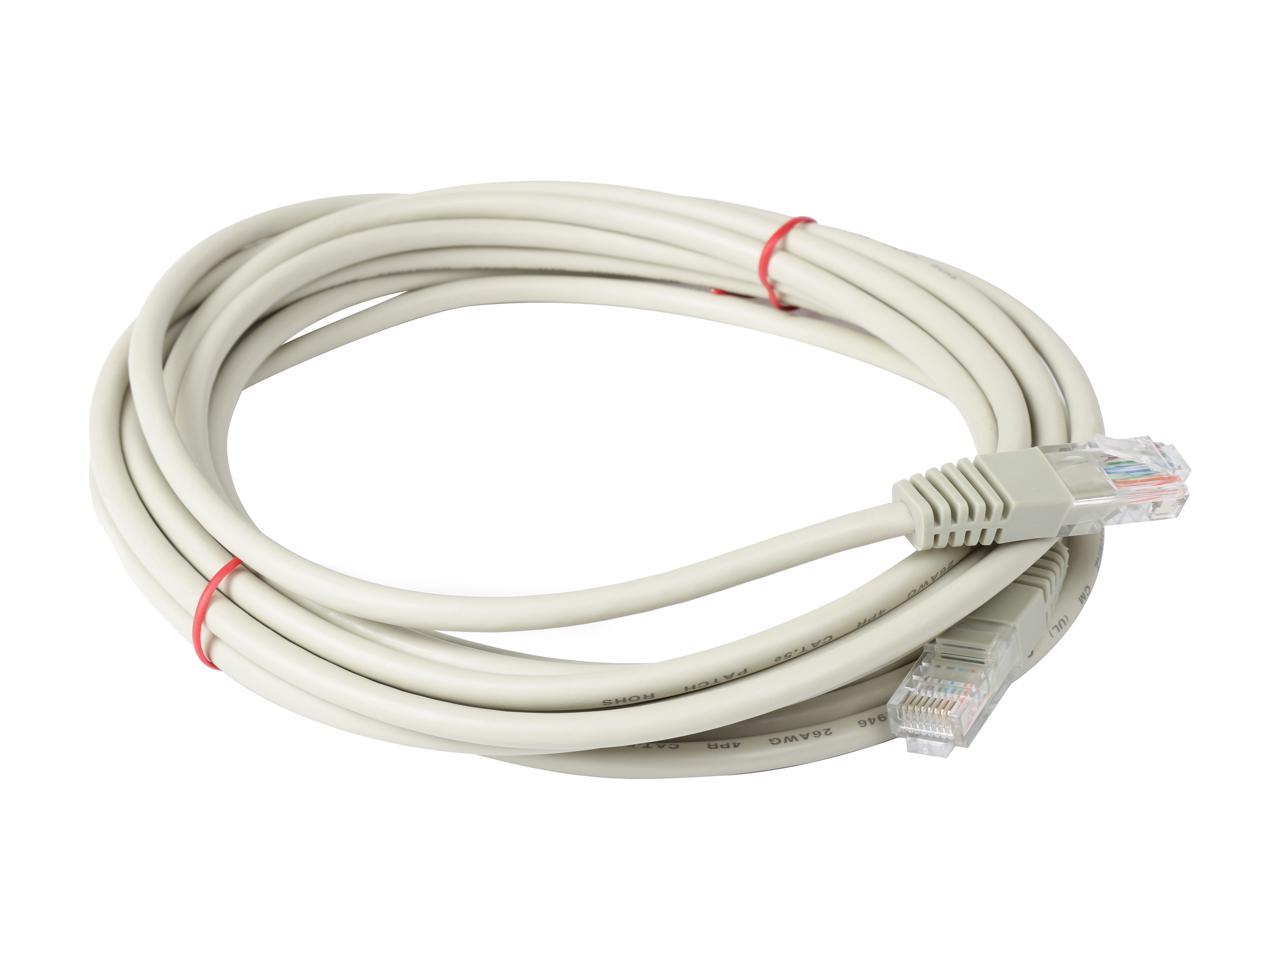 TRIPP LITE N002-015-GY 15 ft. Cat 5E Gray Cat5e 350MHz Molded Patch Cable